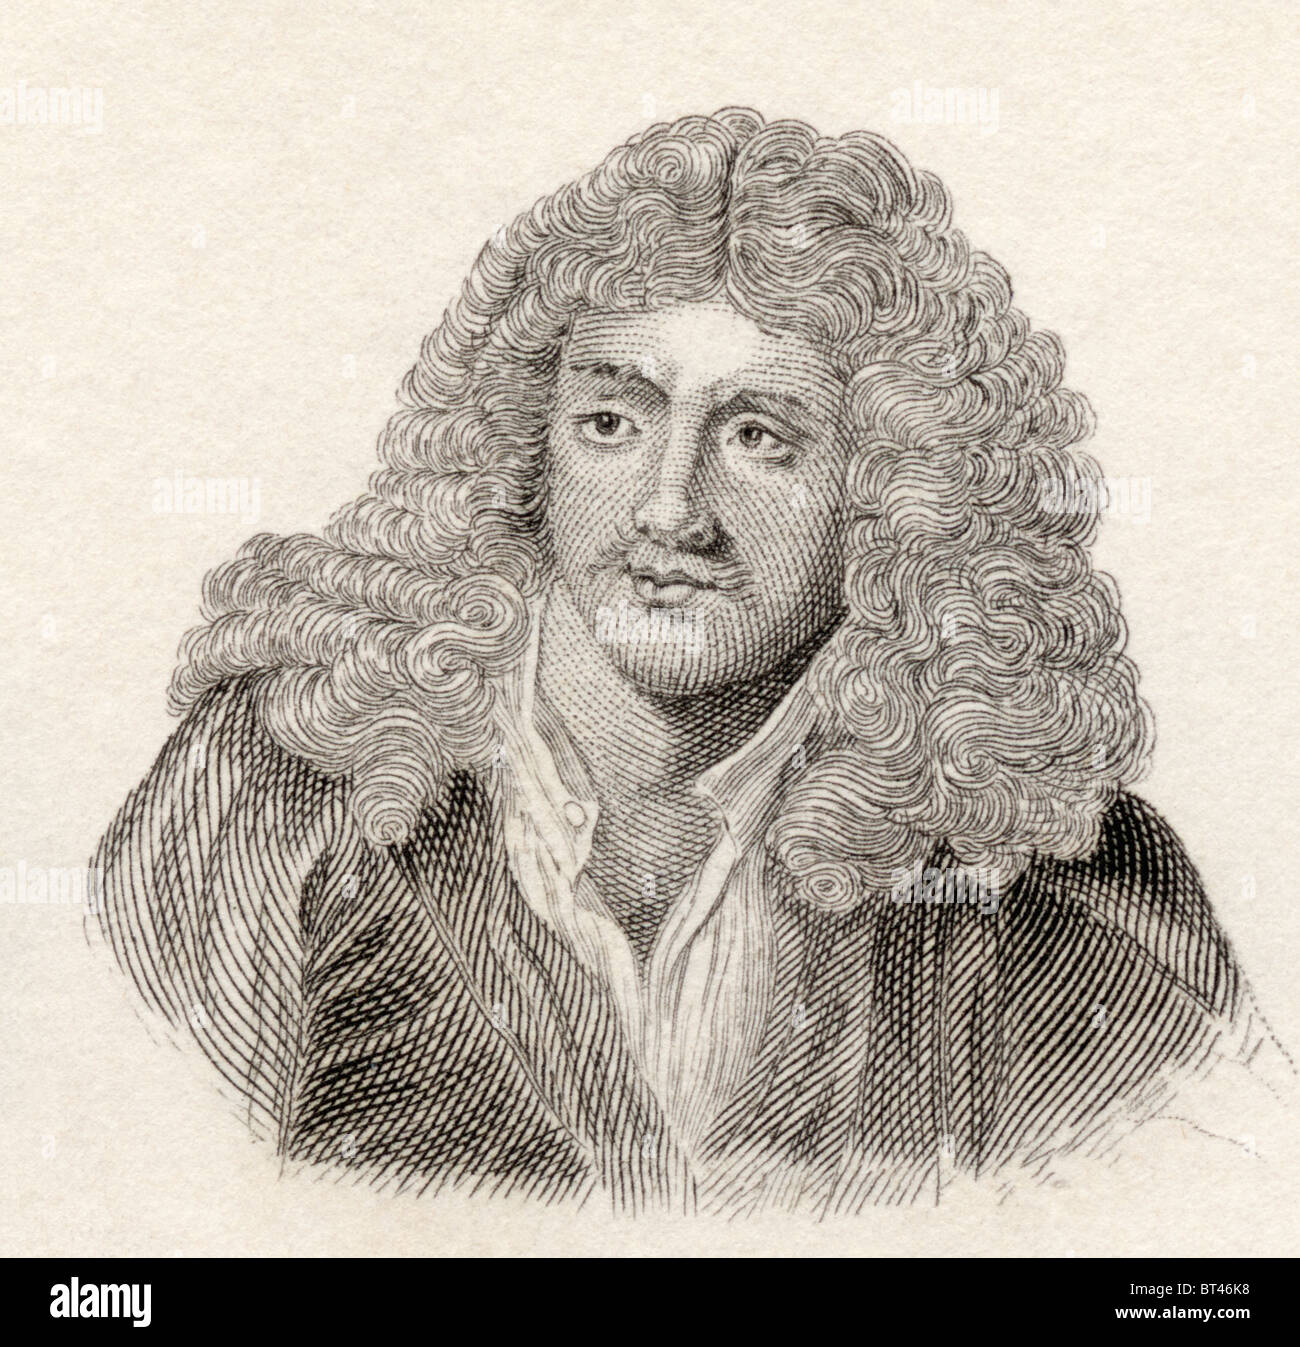 Jean-Baptiste Poquelin, mostly known as Molière, 1622 to 1673. French comic playwright and actor. Stock Photo